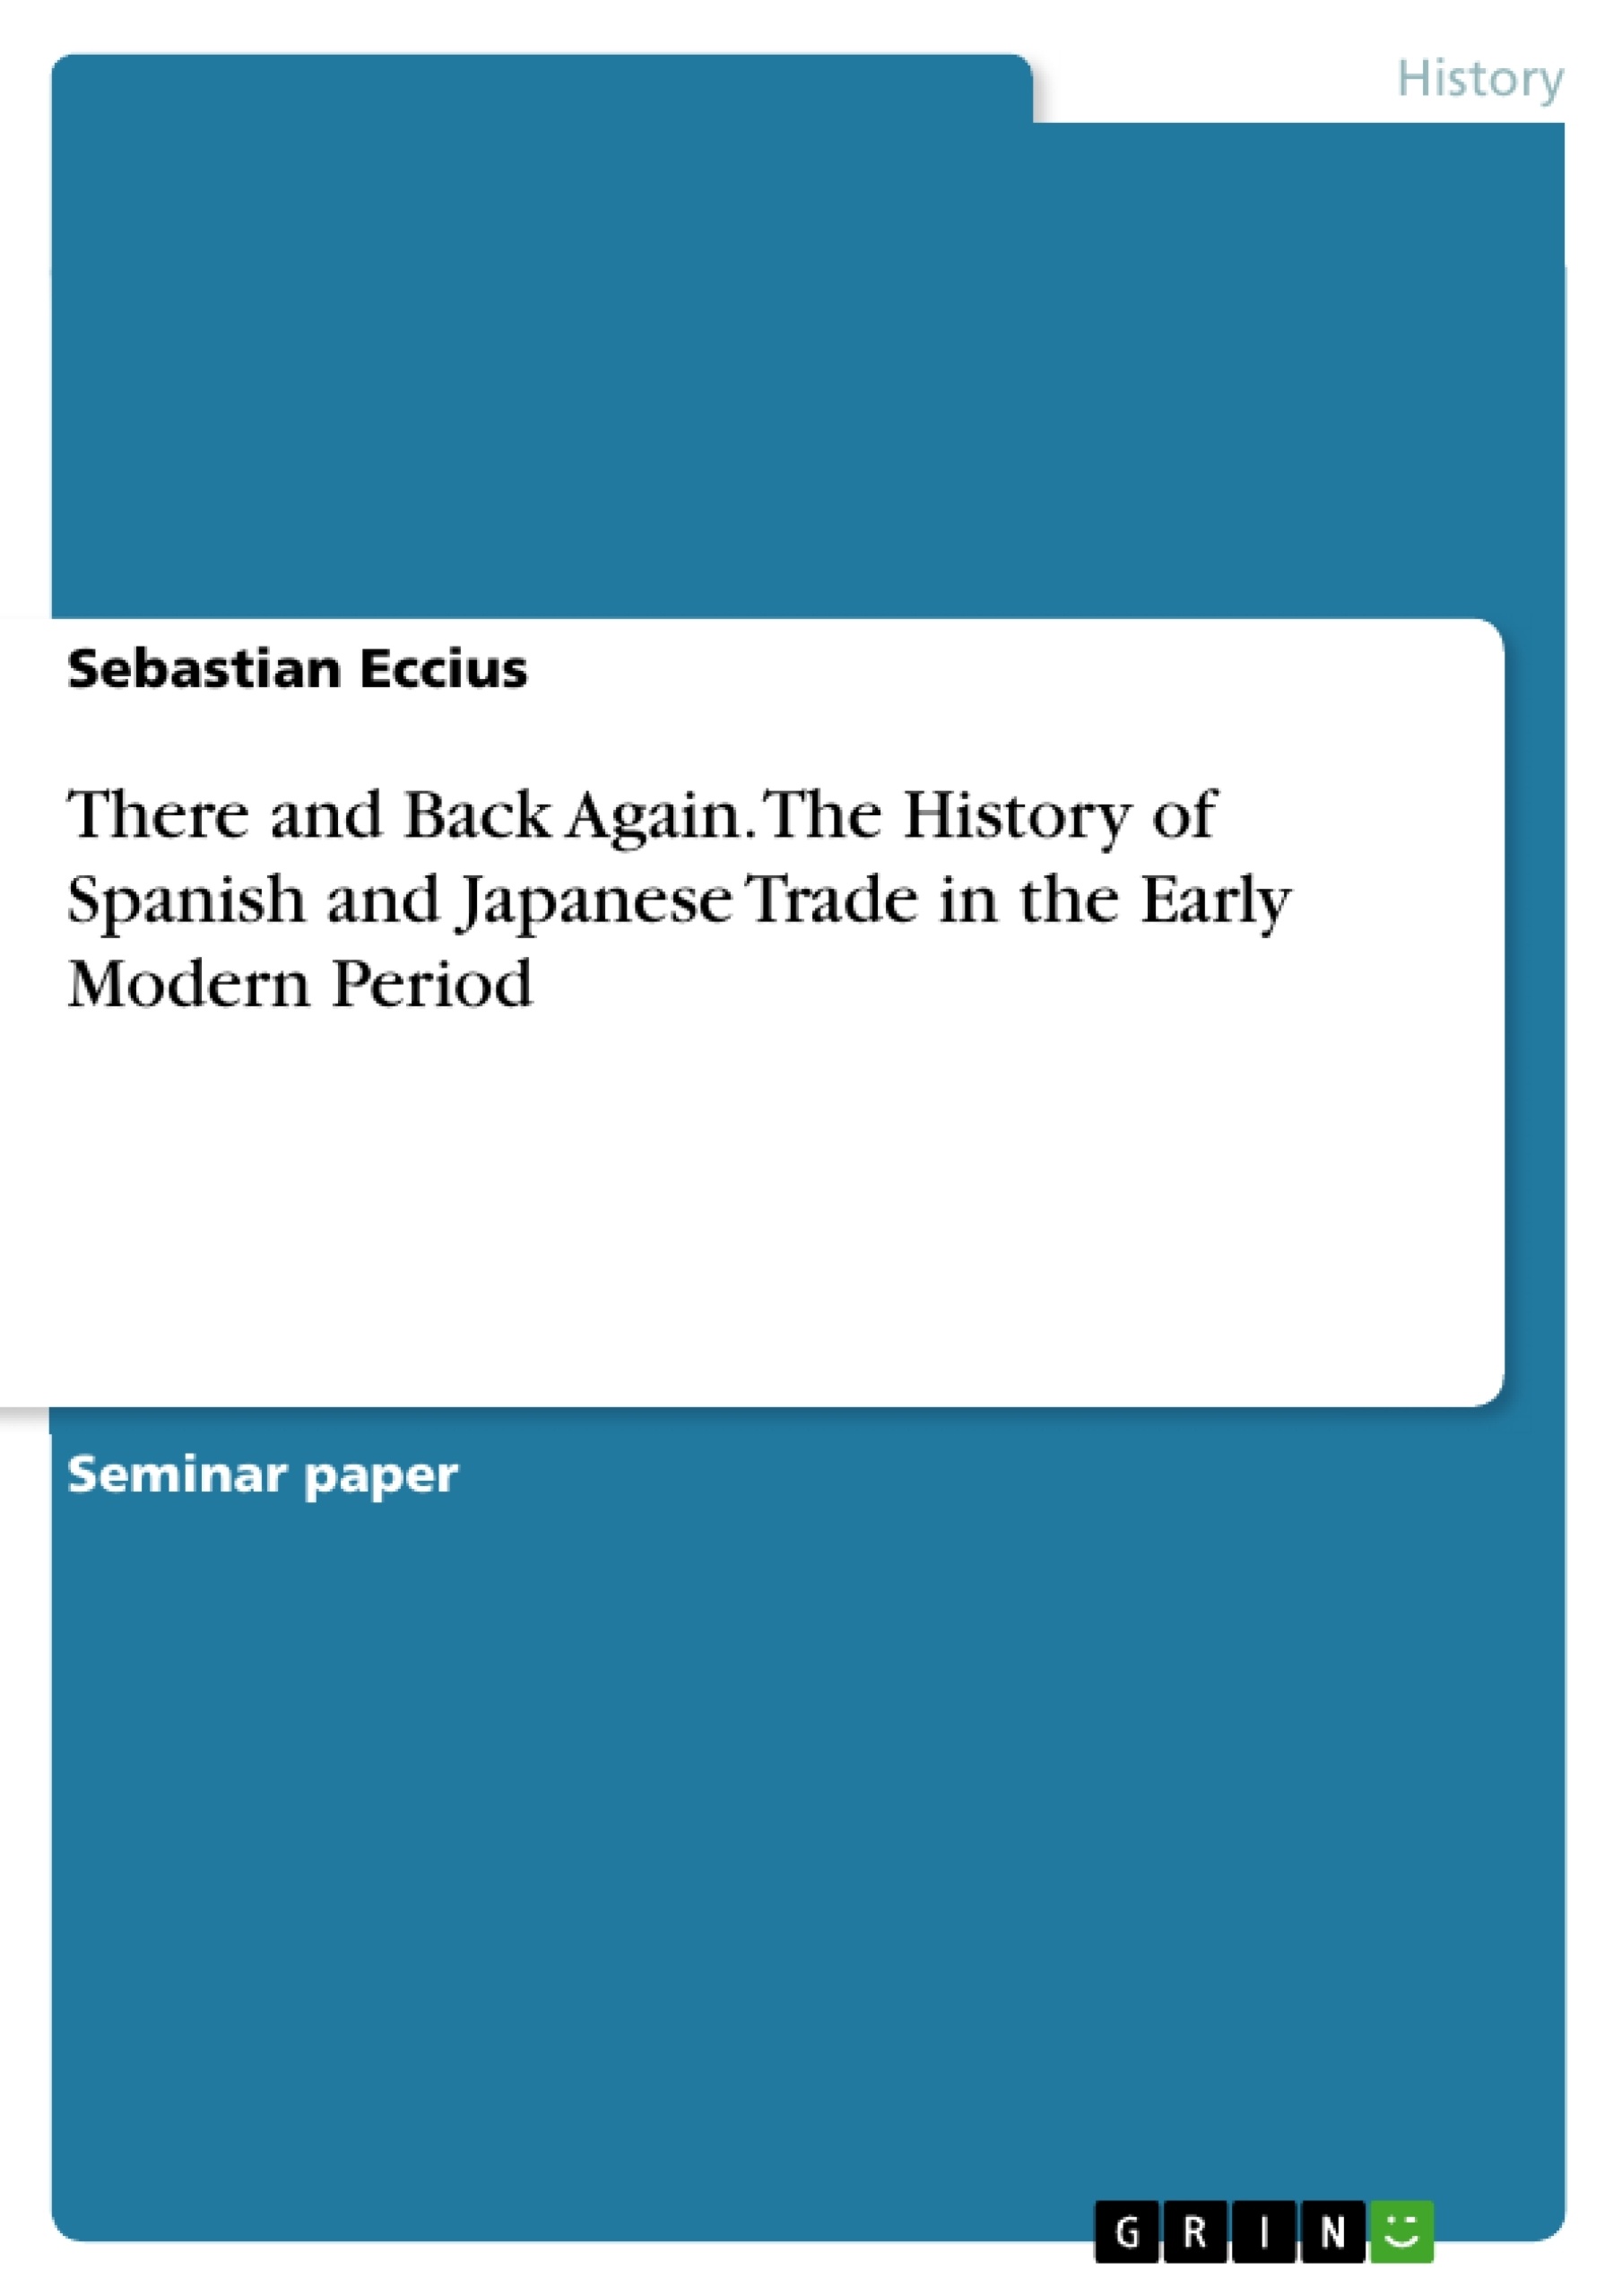 Título: There and Back Again. The History of Spanish and Japanese Trade in the Early Modern Period